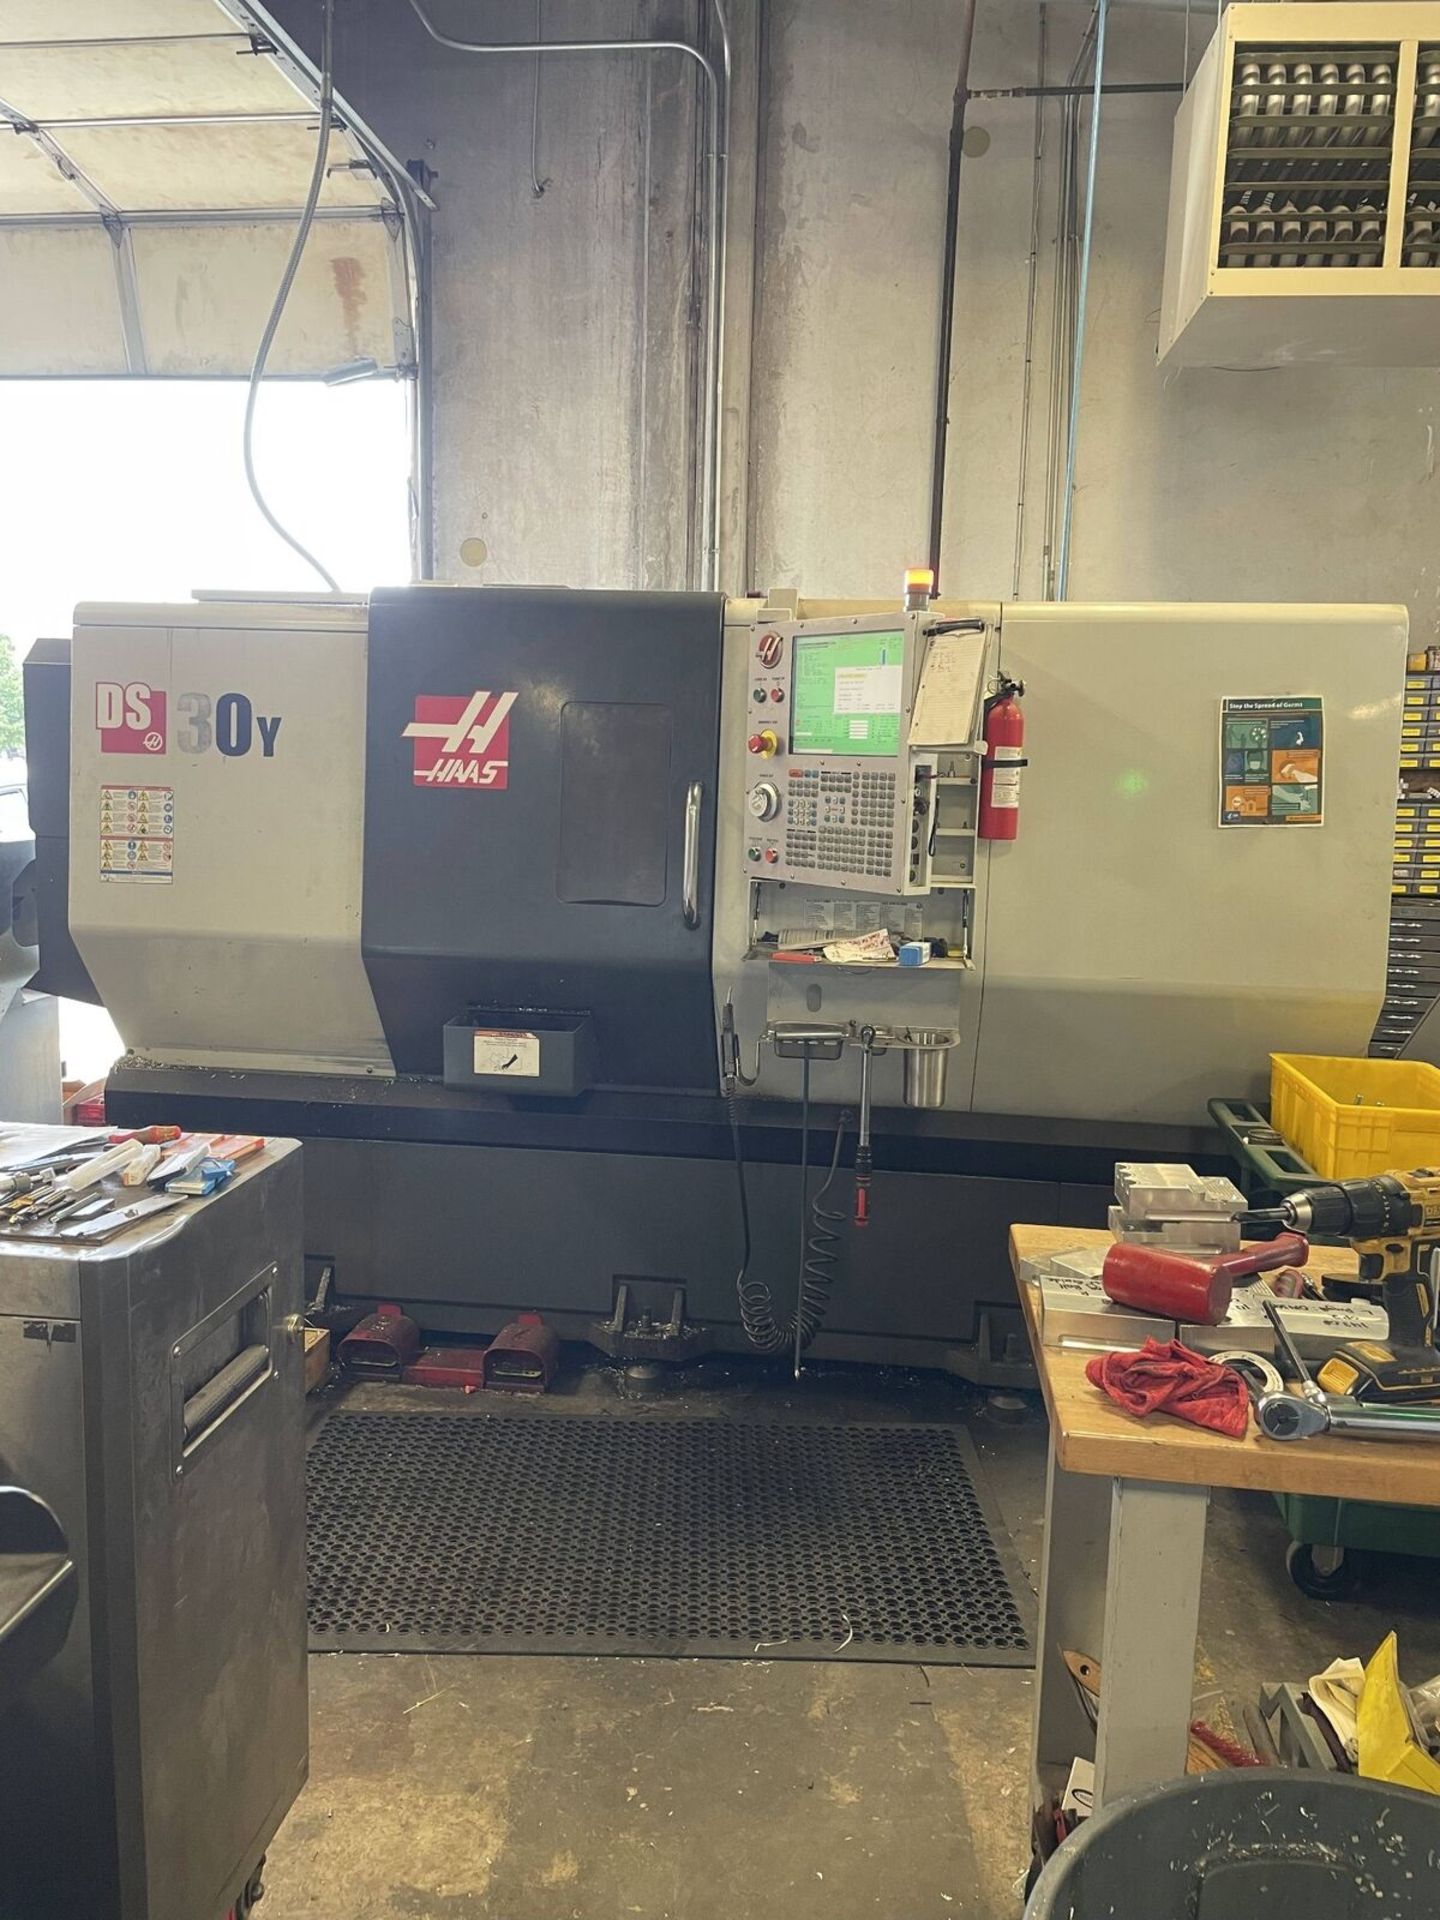 2012 HAAS DS30Y CNC Turning Center With Live Tooling/Dual Spindle/Bar Feeder - Image 2 of 18